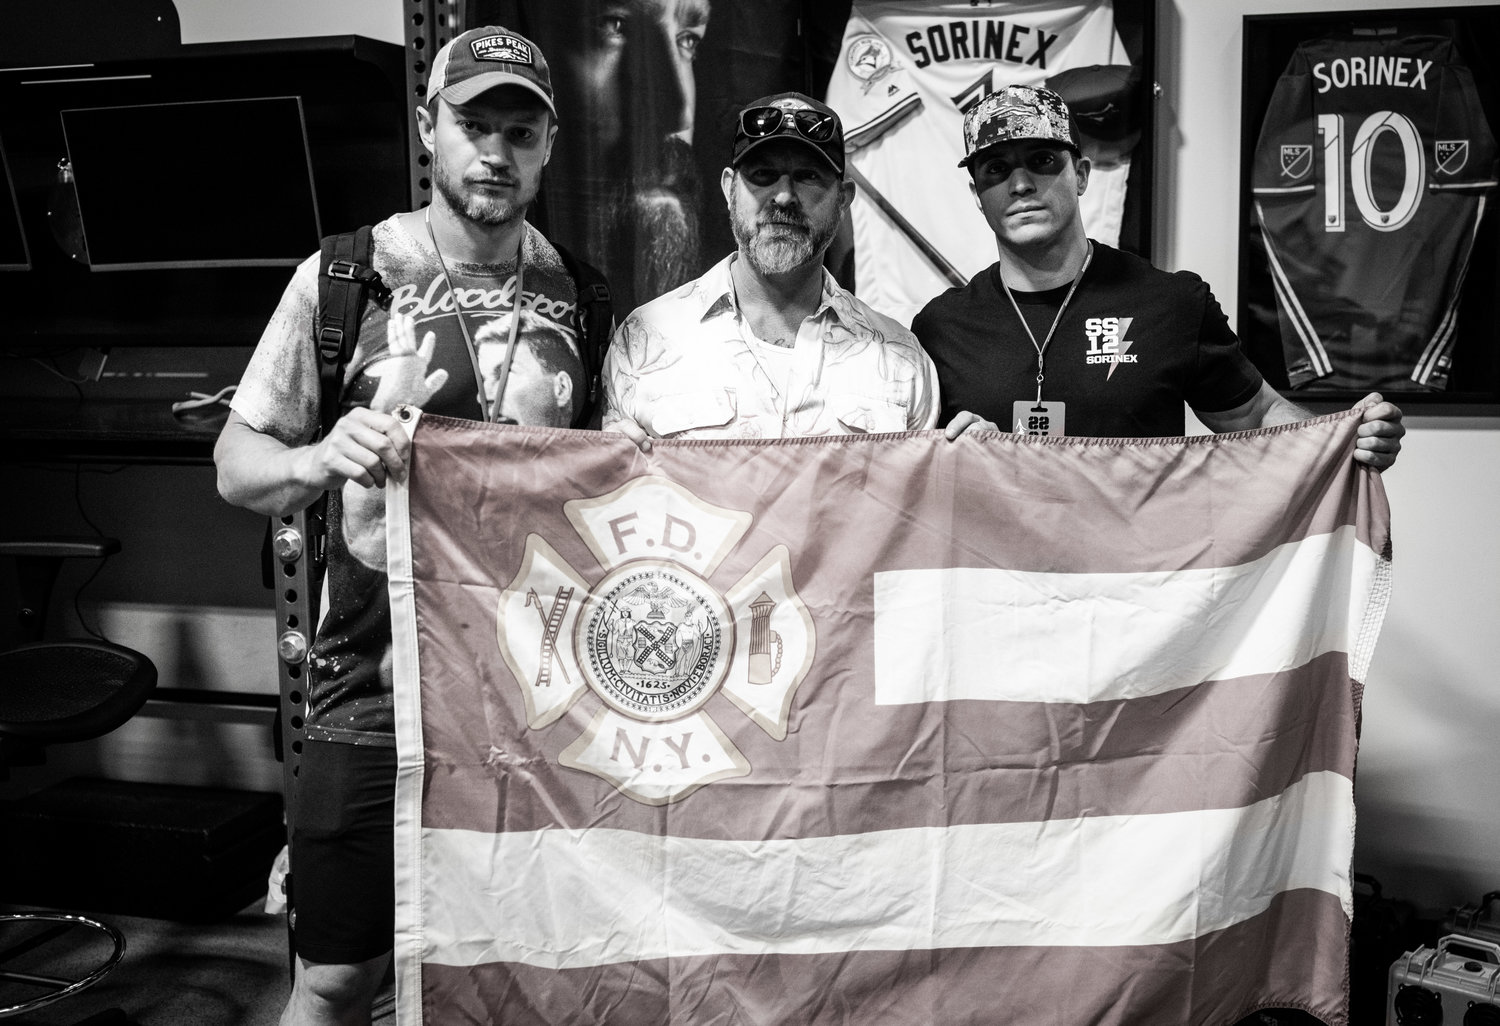 Brady stands with the FDNY Ladder 10 Flag owned by his friend, Duncan Butler. Duncan is the Business Development Specialist for Zac Brown Band.